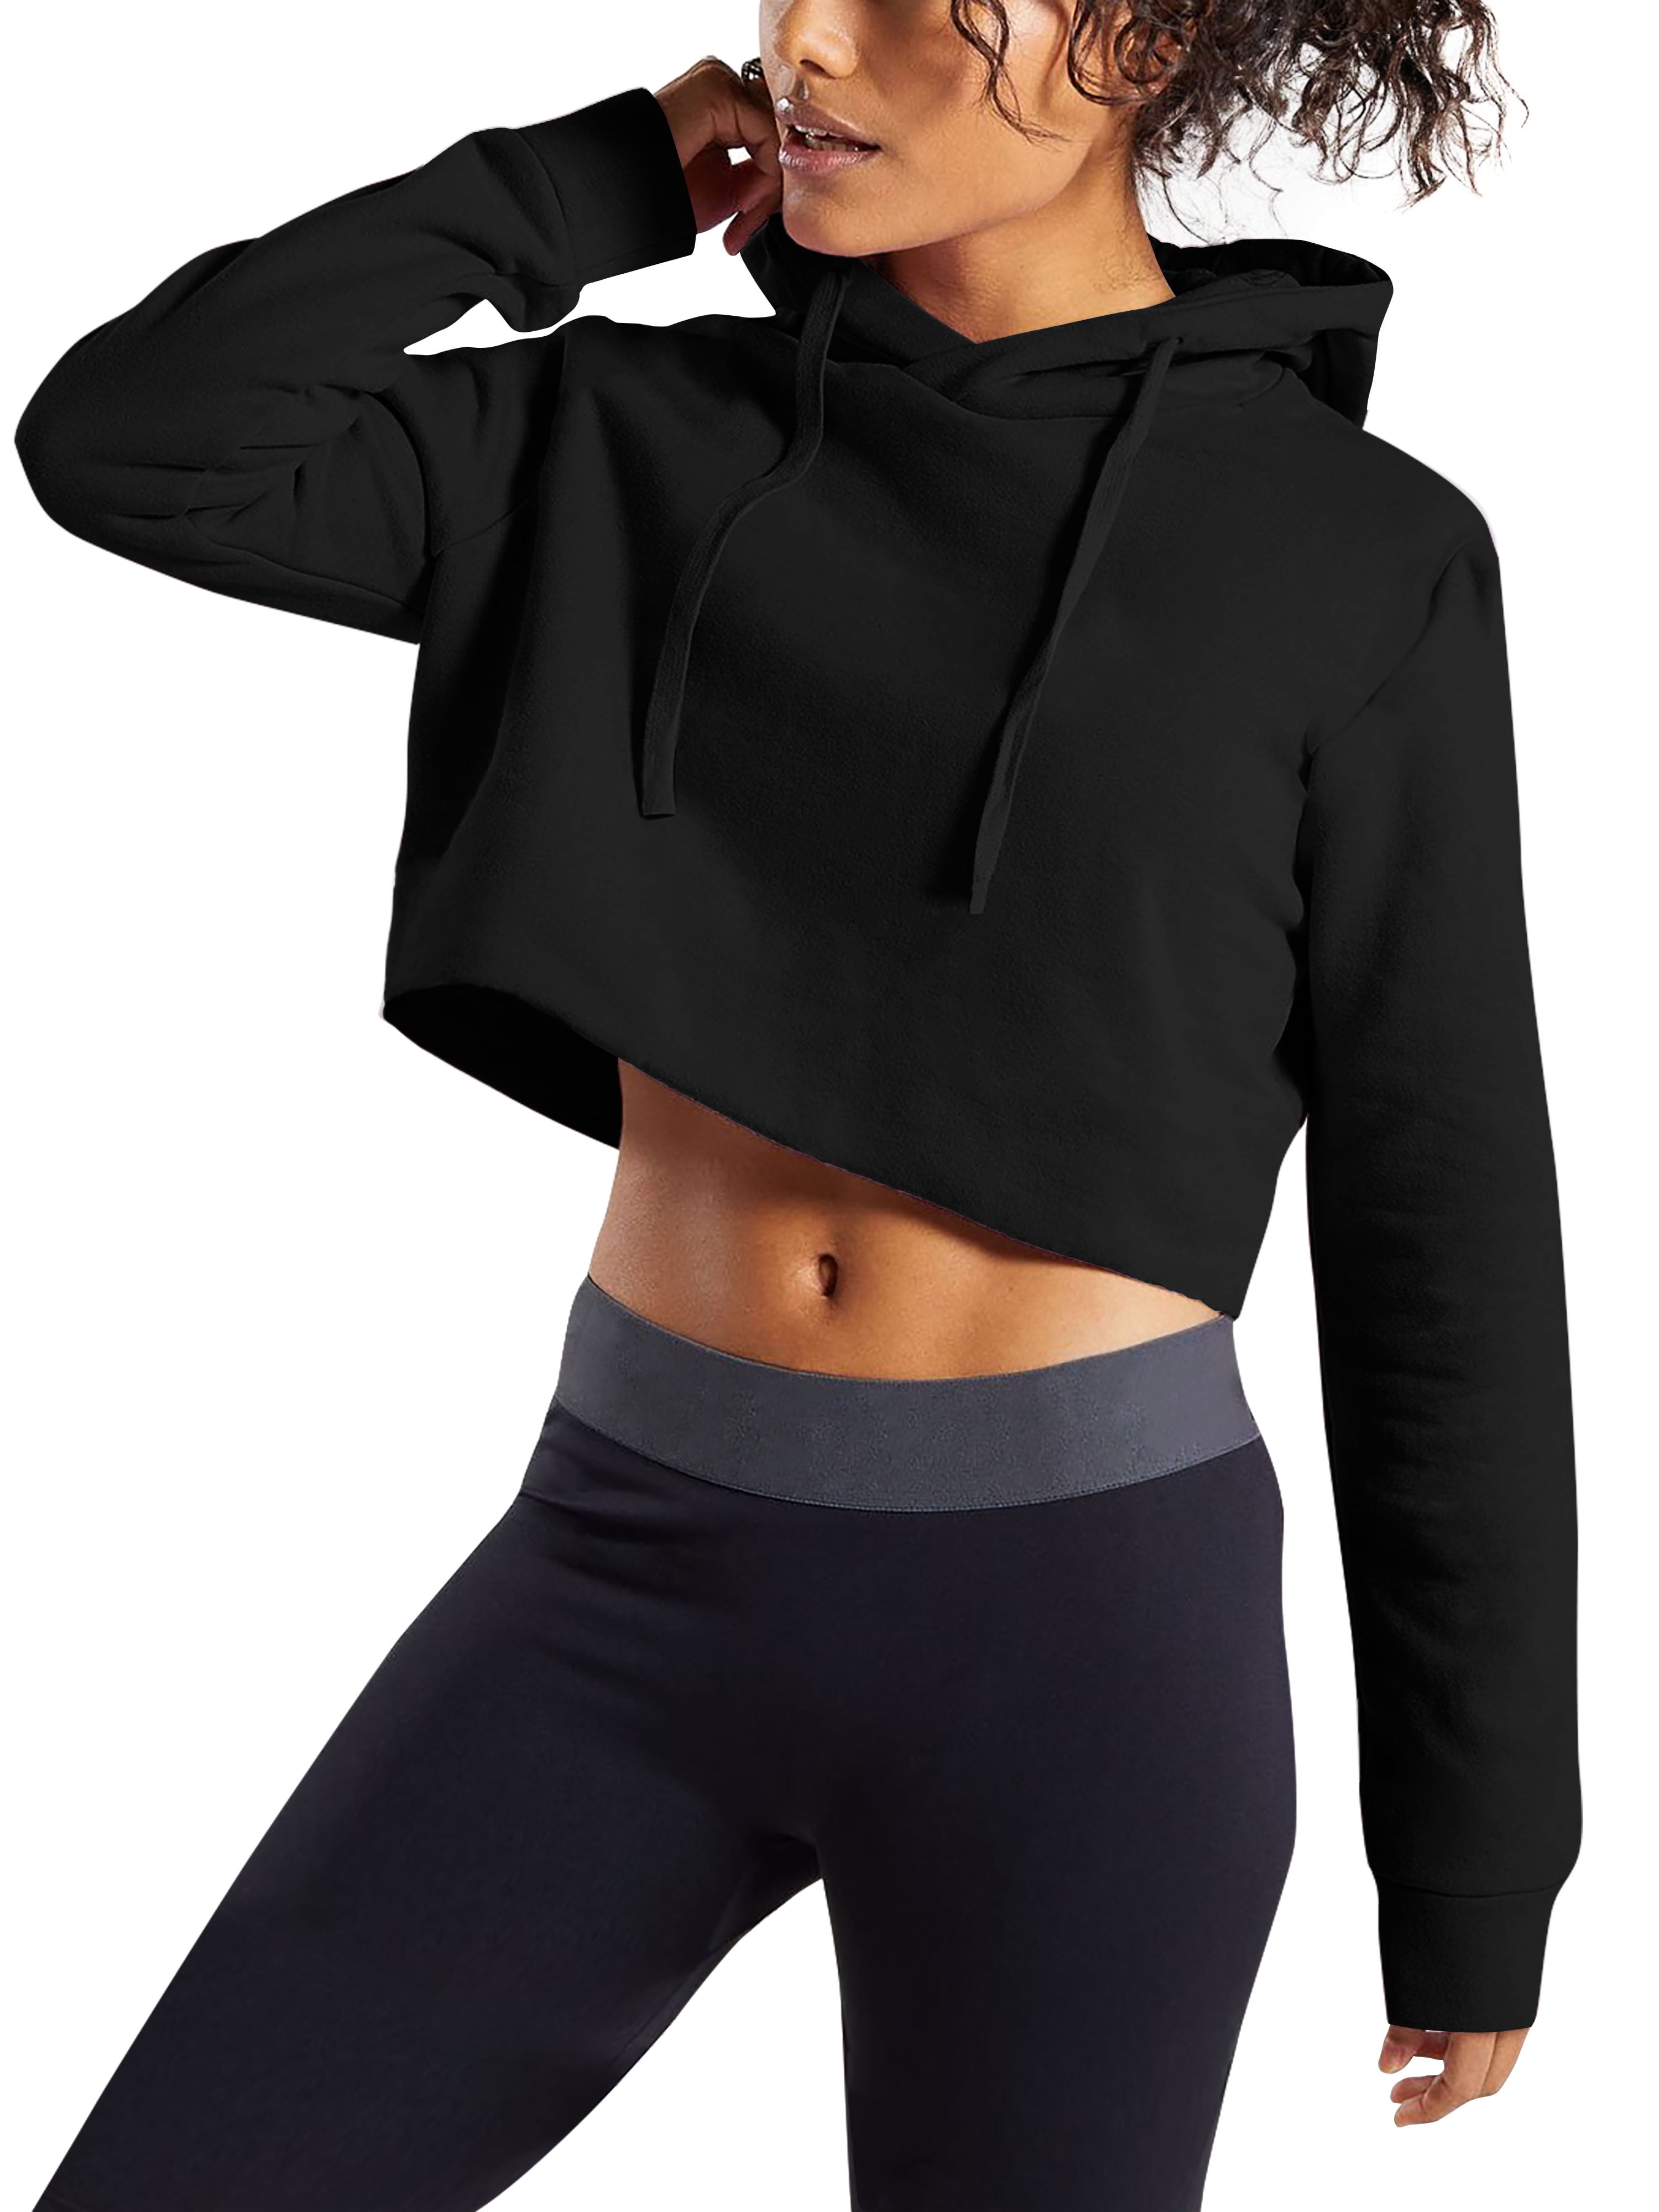 Ma Croix Womens Active Pullover Hoodie Sweatshirt Casual Workout Lounge S-2XL